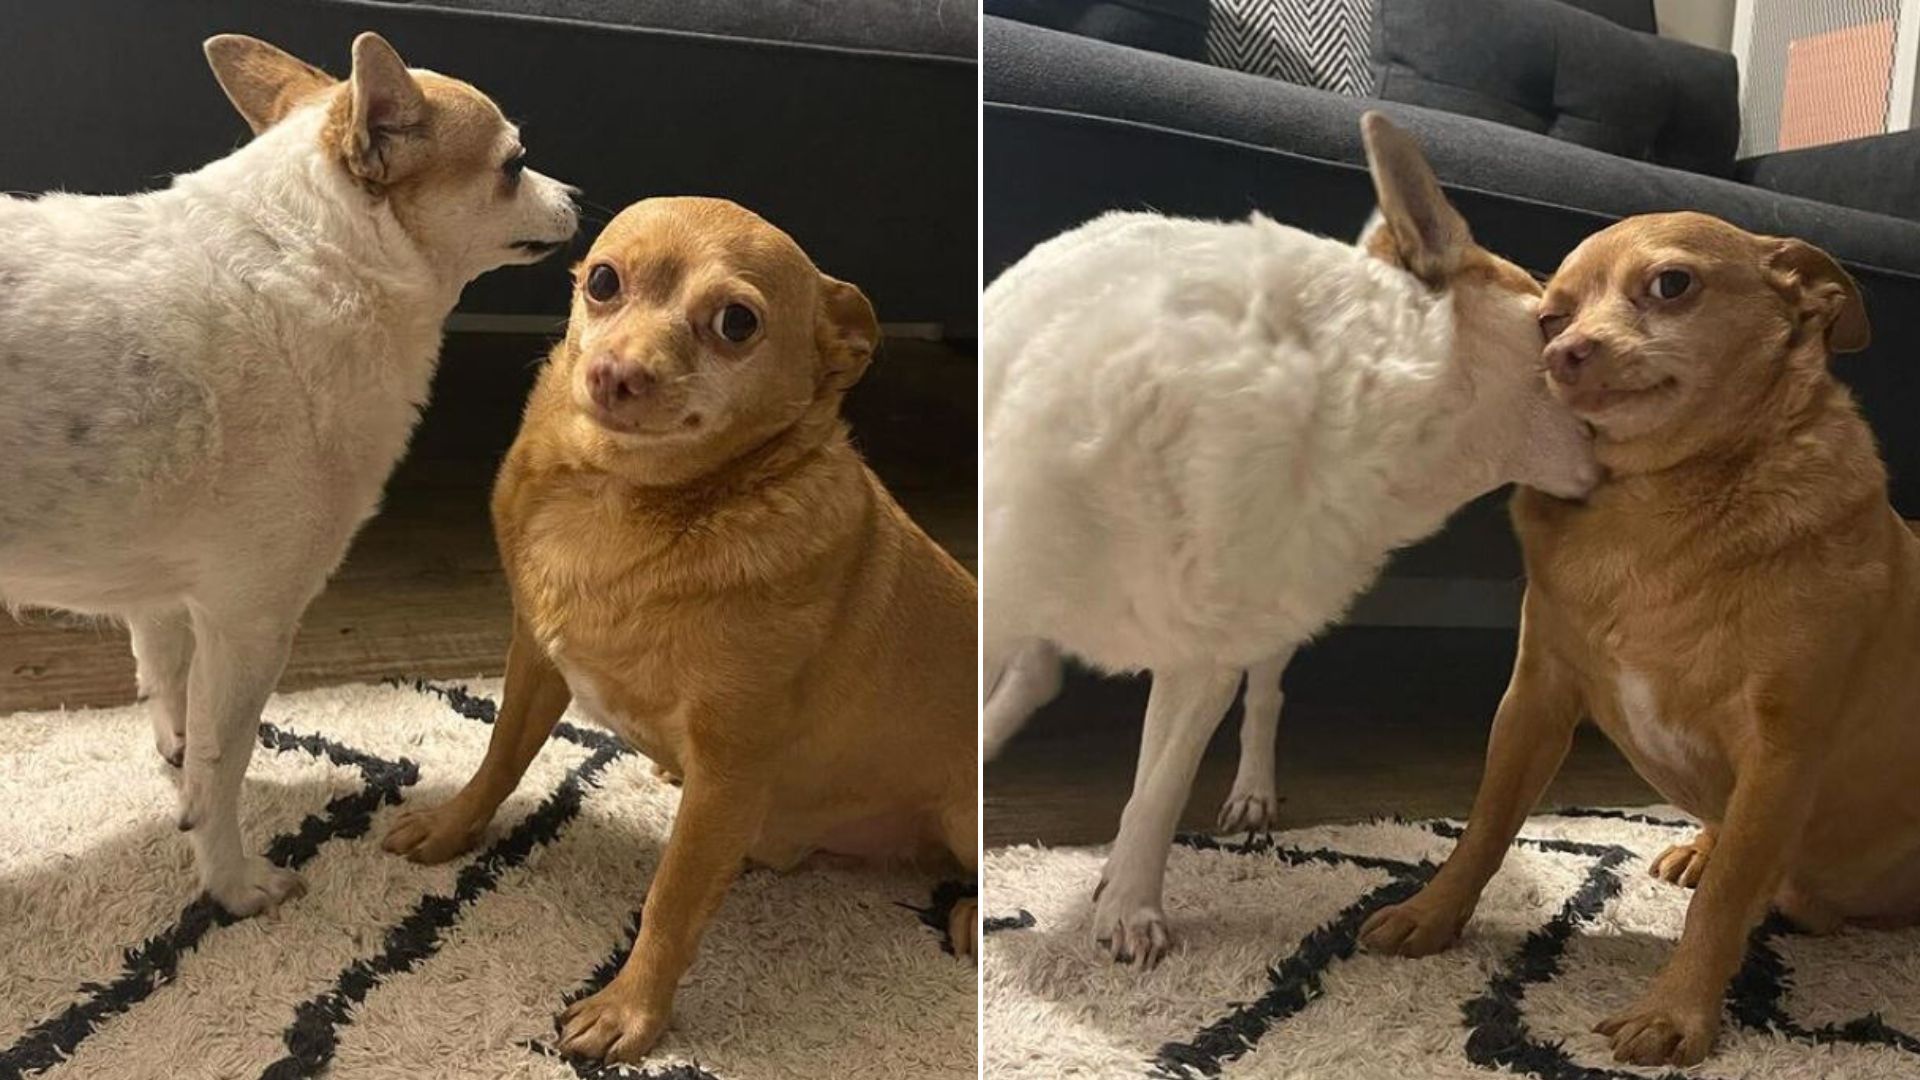 Rescue Chihuahua Has The Funniest Look That Makes Everyone Smile Instantly